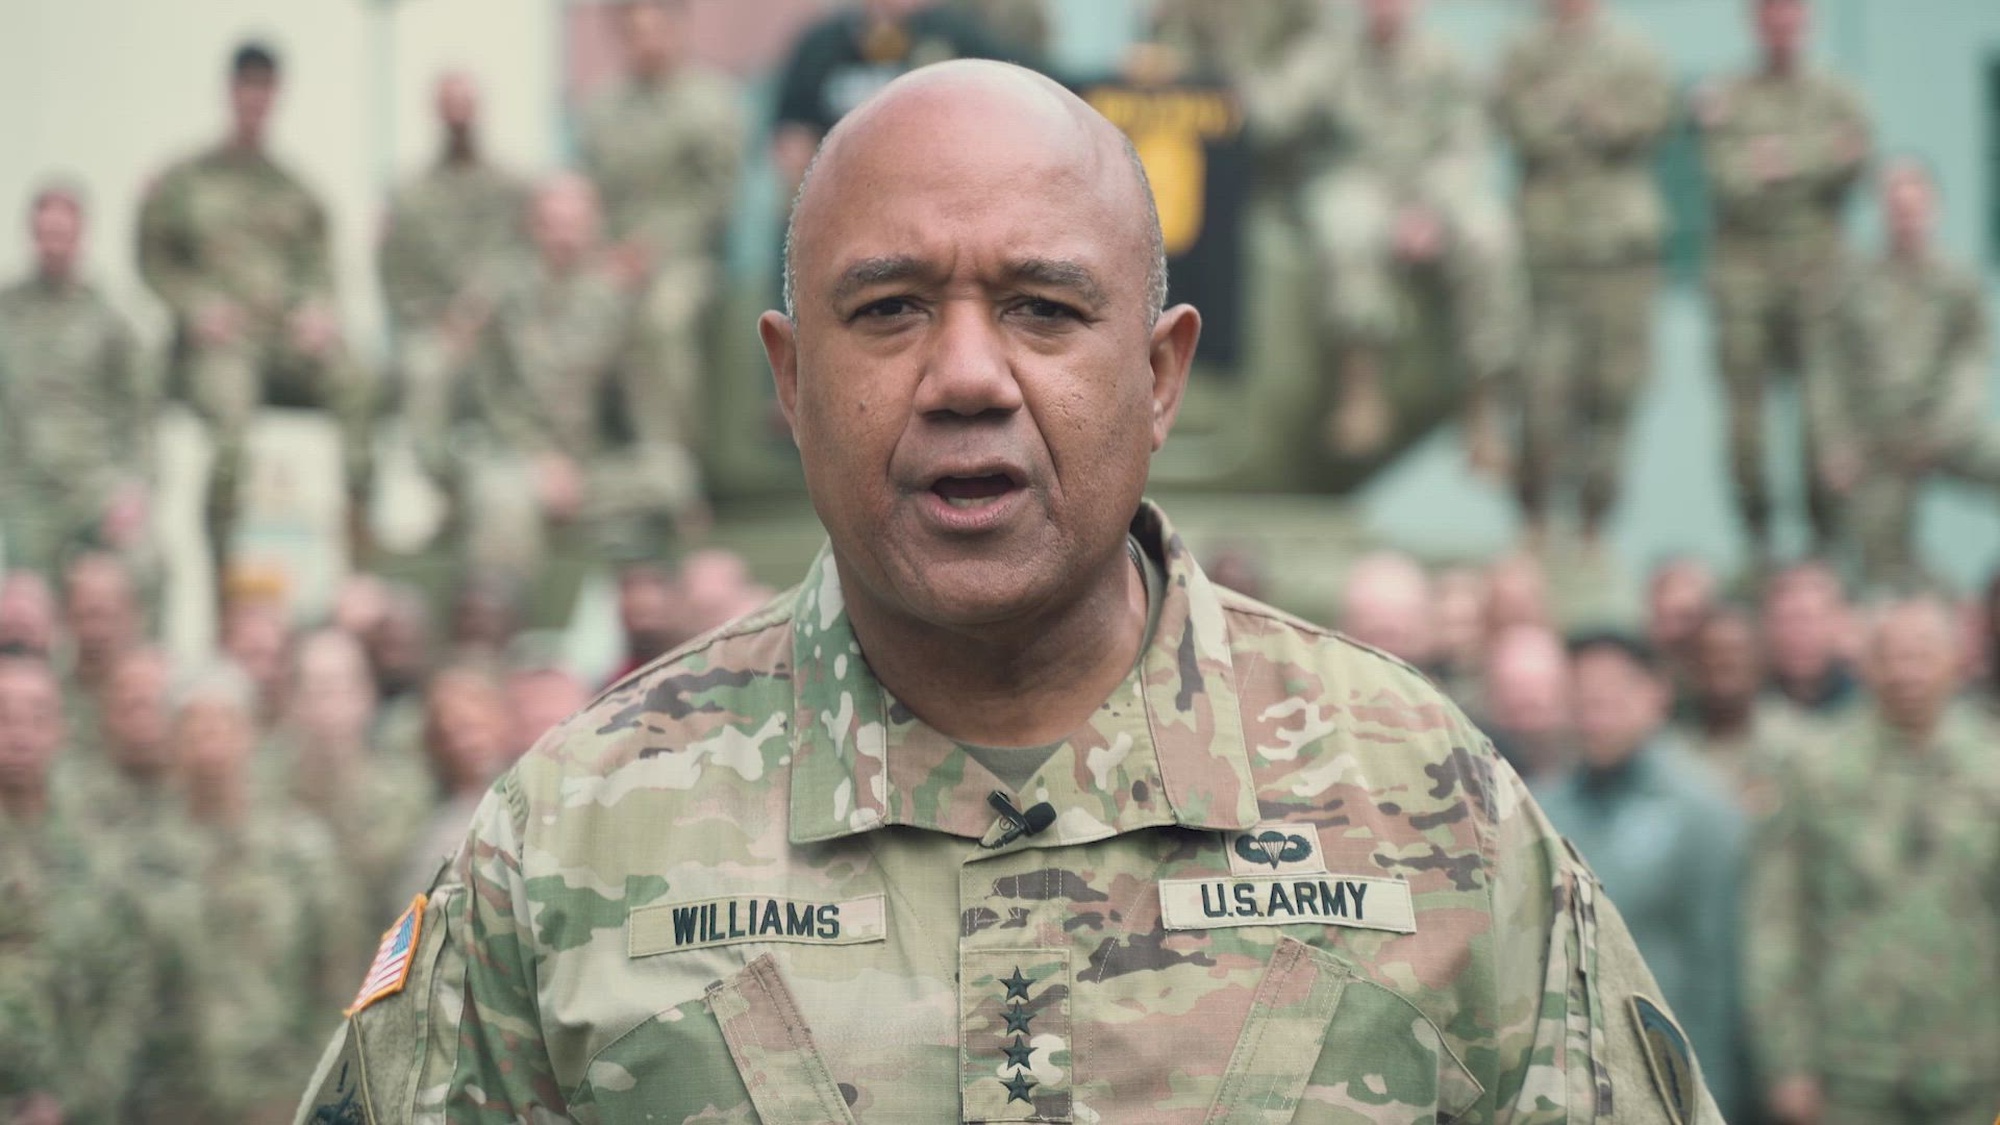 U.S. Army Europe and Africa 2022 Army-Navy Game Shout Out Video. 

Gen. Darryl A. Williams, Commanding General of U.S. Army Europe and Africa graduated from the United States Military Academy, West Point, in 1983.